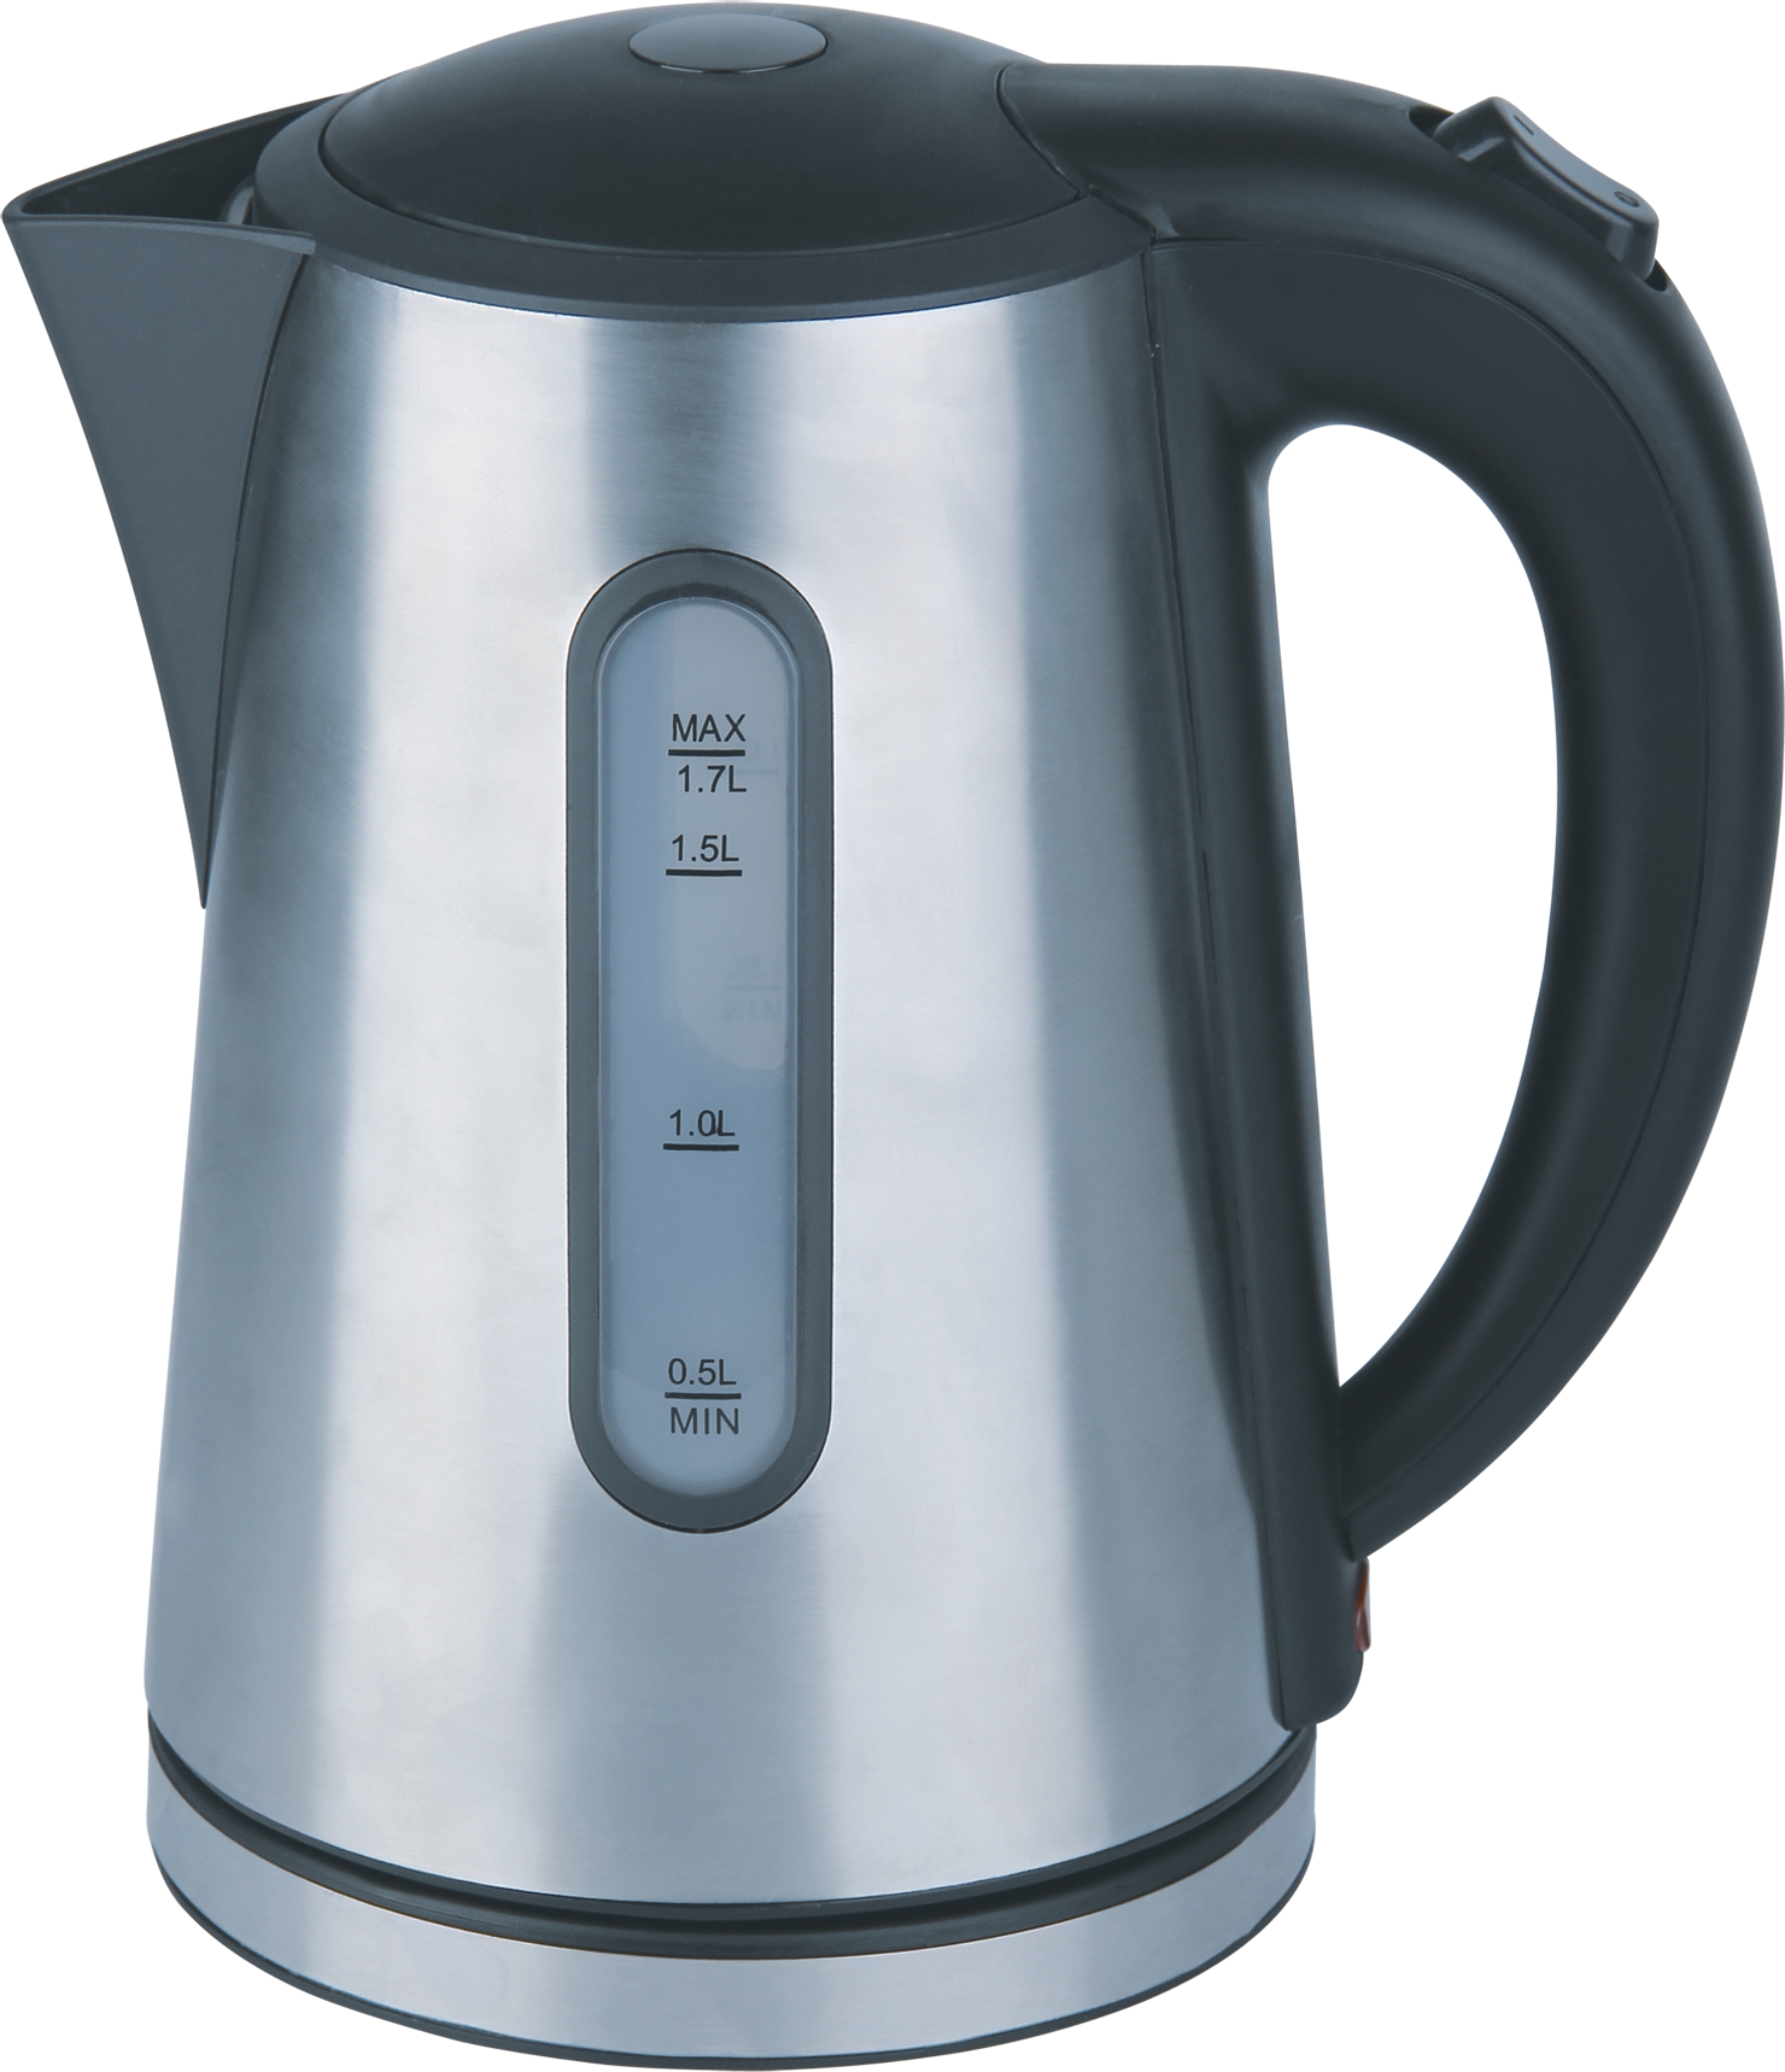 SASTRO AS-1009 STAINLESS STEEL KETTLE 1.7L 2.2KW